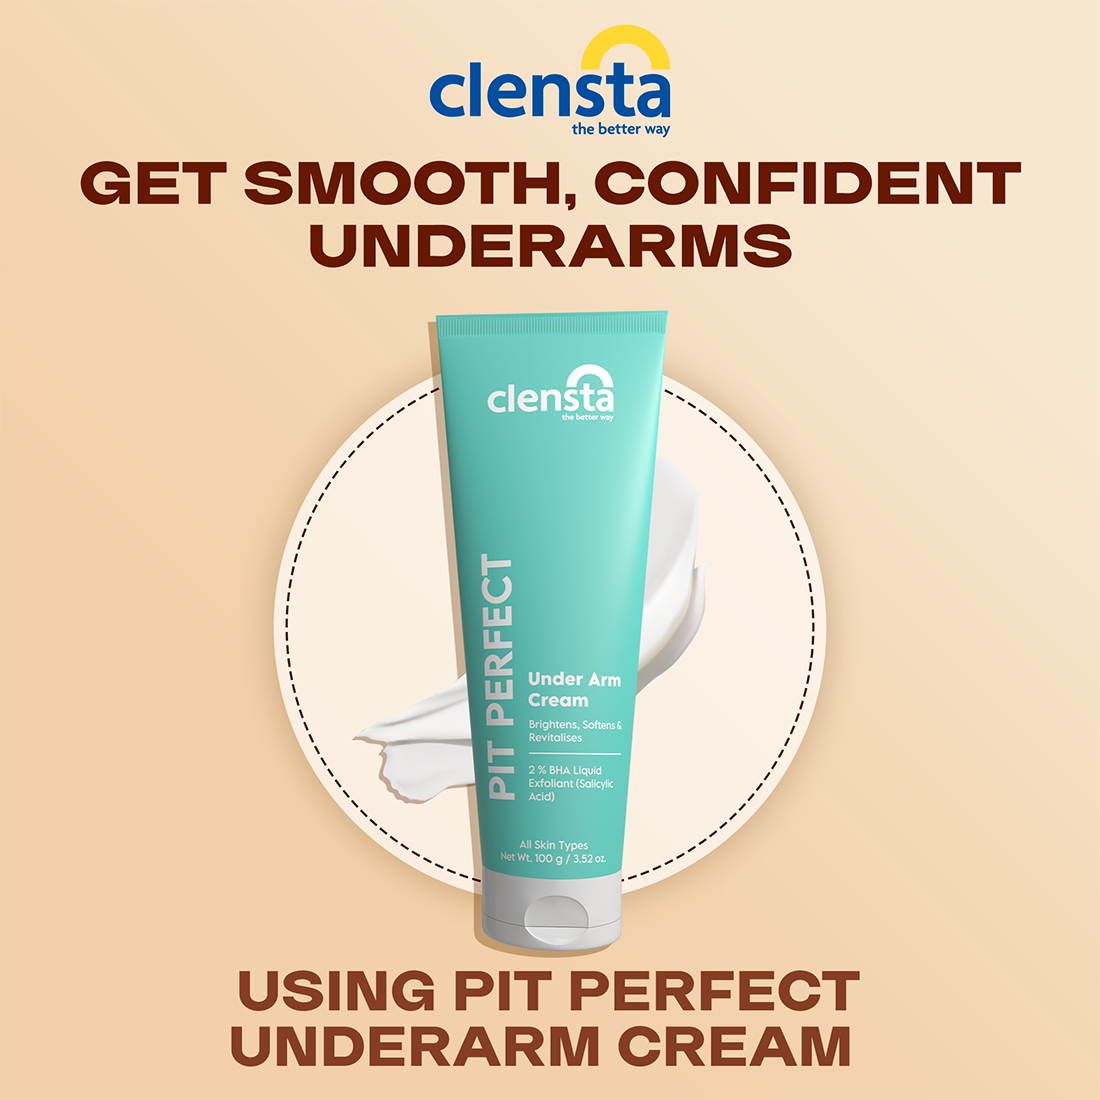 Pit Perfect Under Arm Cream Enriched With Kaolin Clay and 2% BHA Liquid Exfoliant (Salicylic Acid) For Soft, Odour-Free Underarms